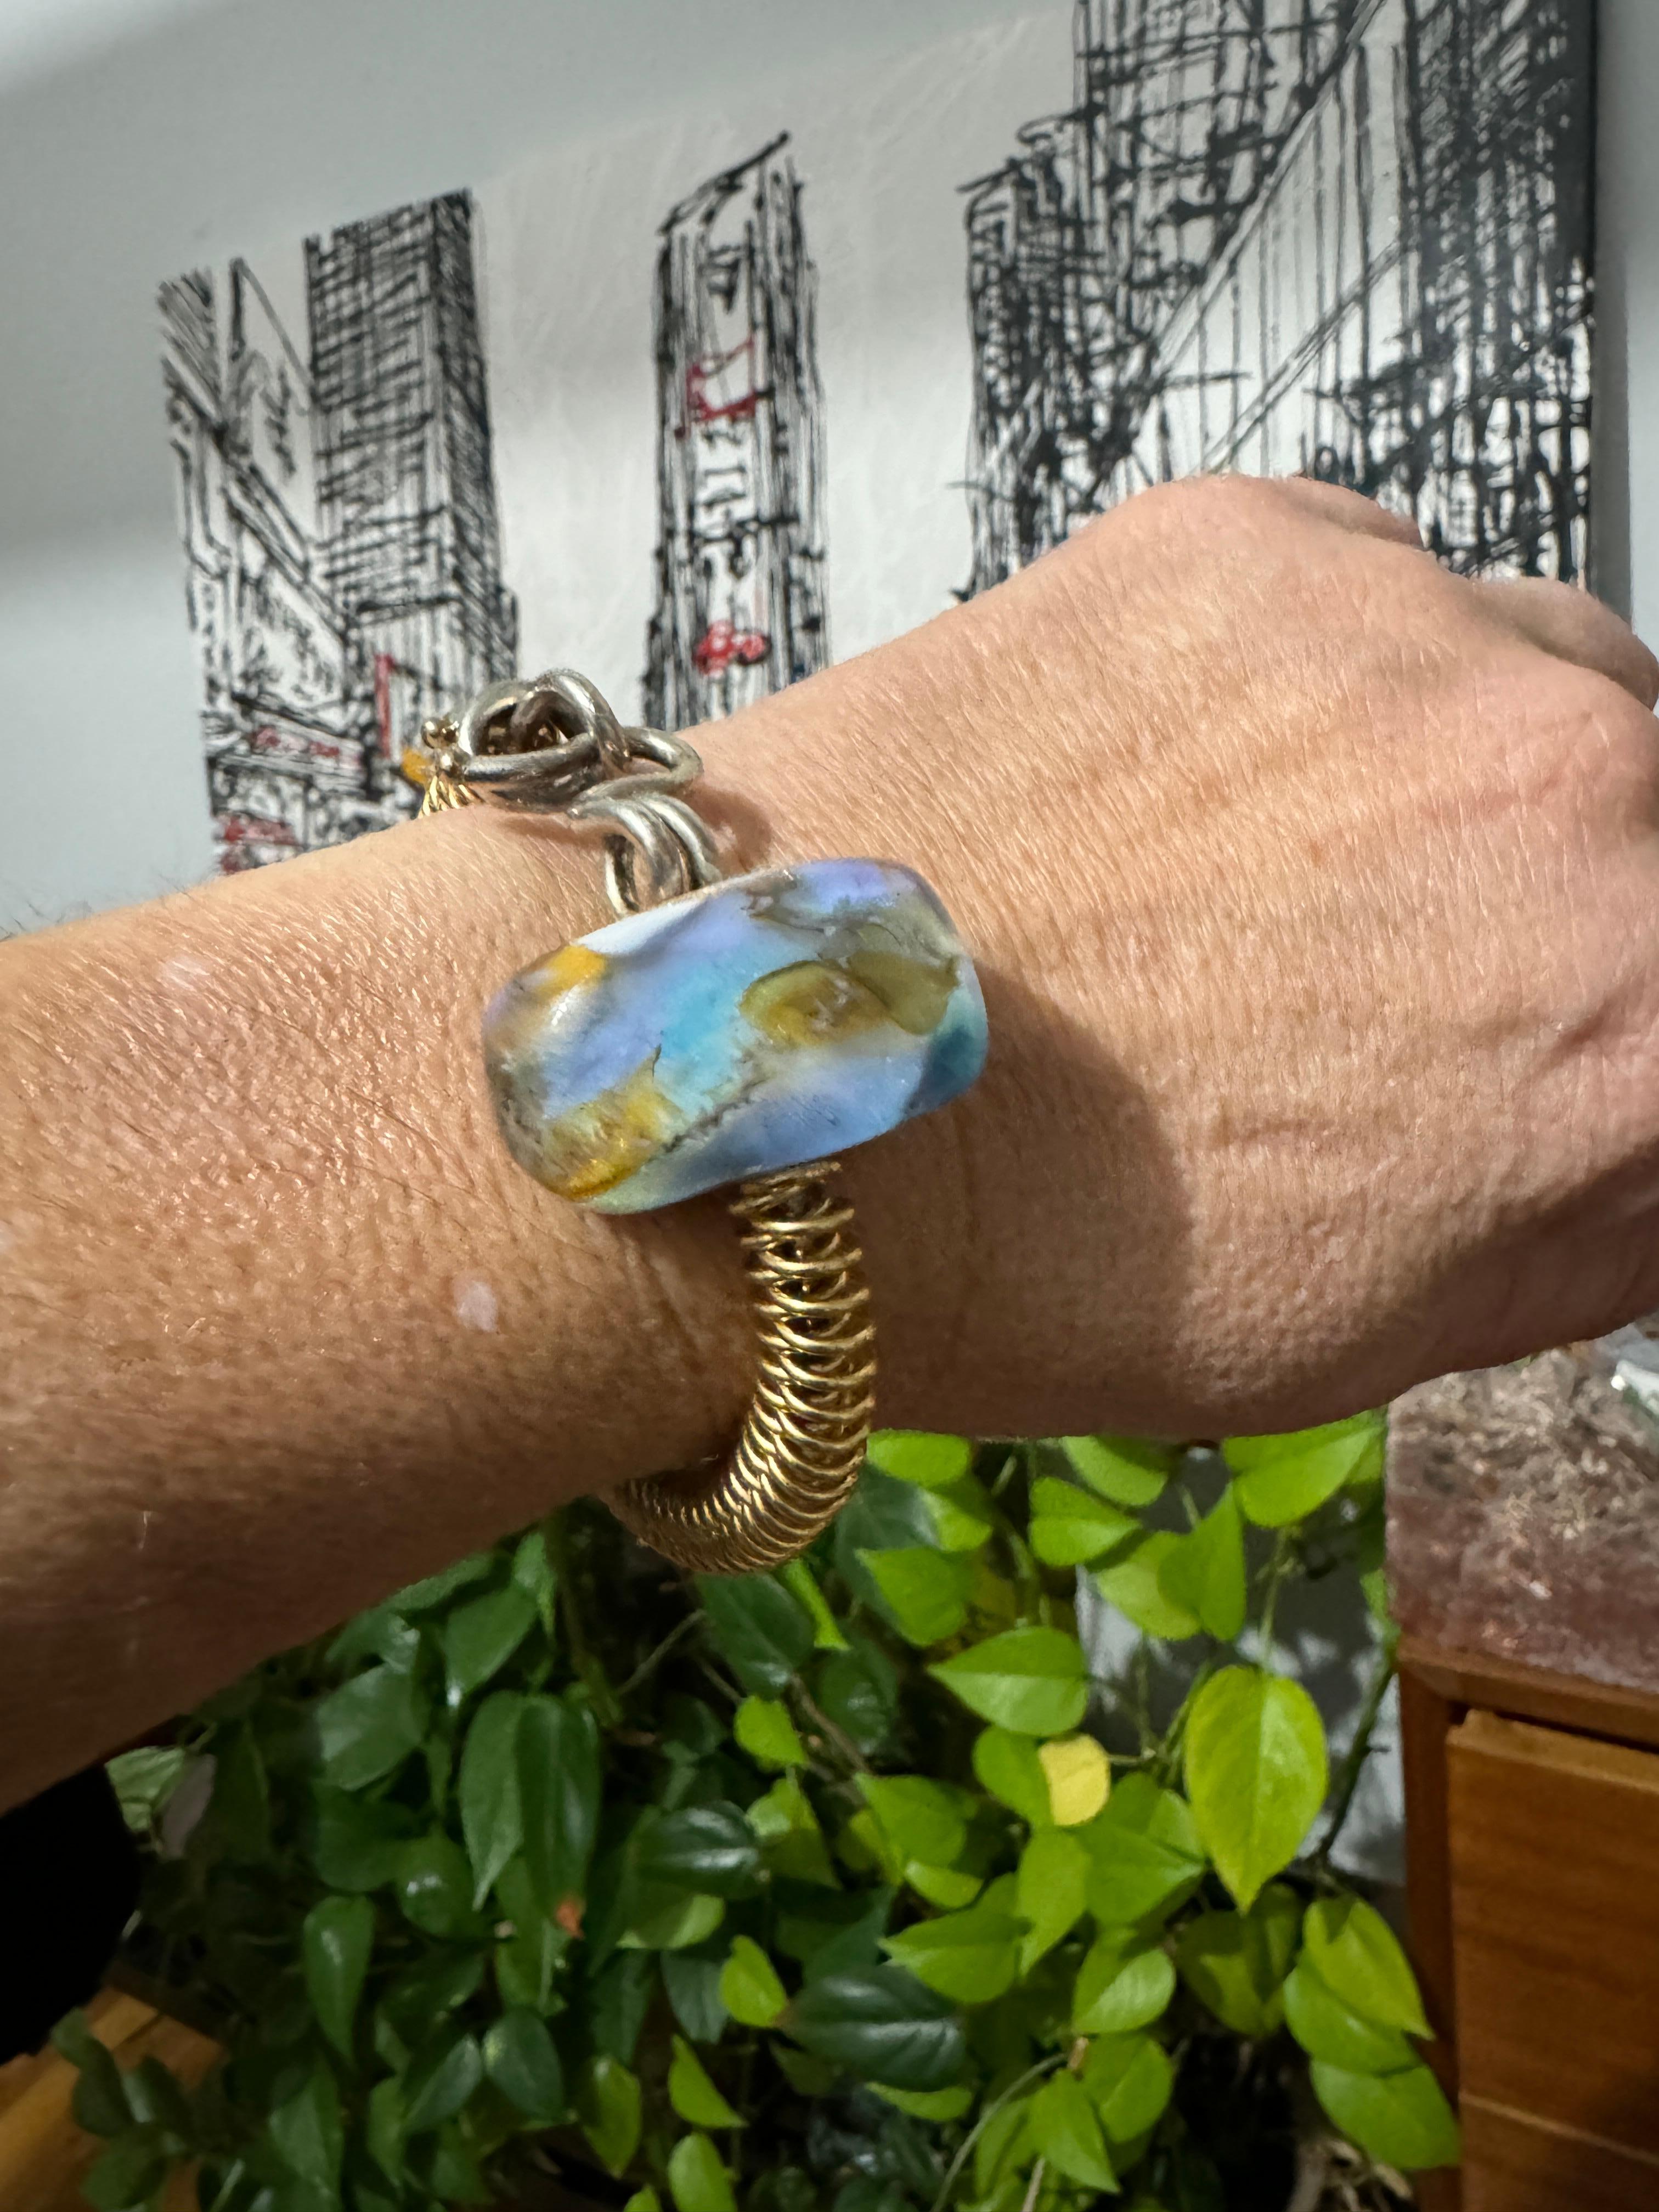 Kathleen Dennison 14k Yellow Gold & Sterling Silver Bracelet. Mixed metals make up this hand crafted coiled Bracelet with a large glass bead front and center with amazing coloring in it. I'm a 6.5 Wrist and I have room. This should fit up to a 7.5